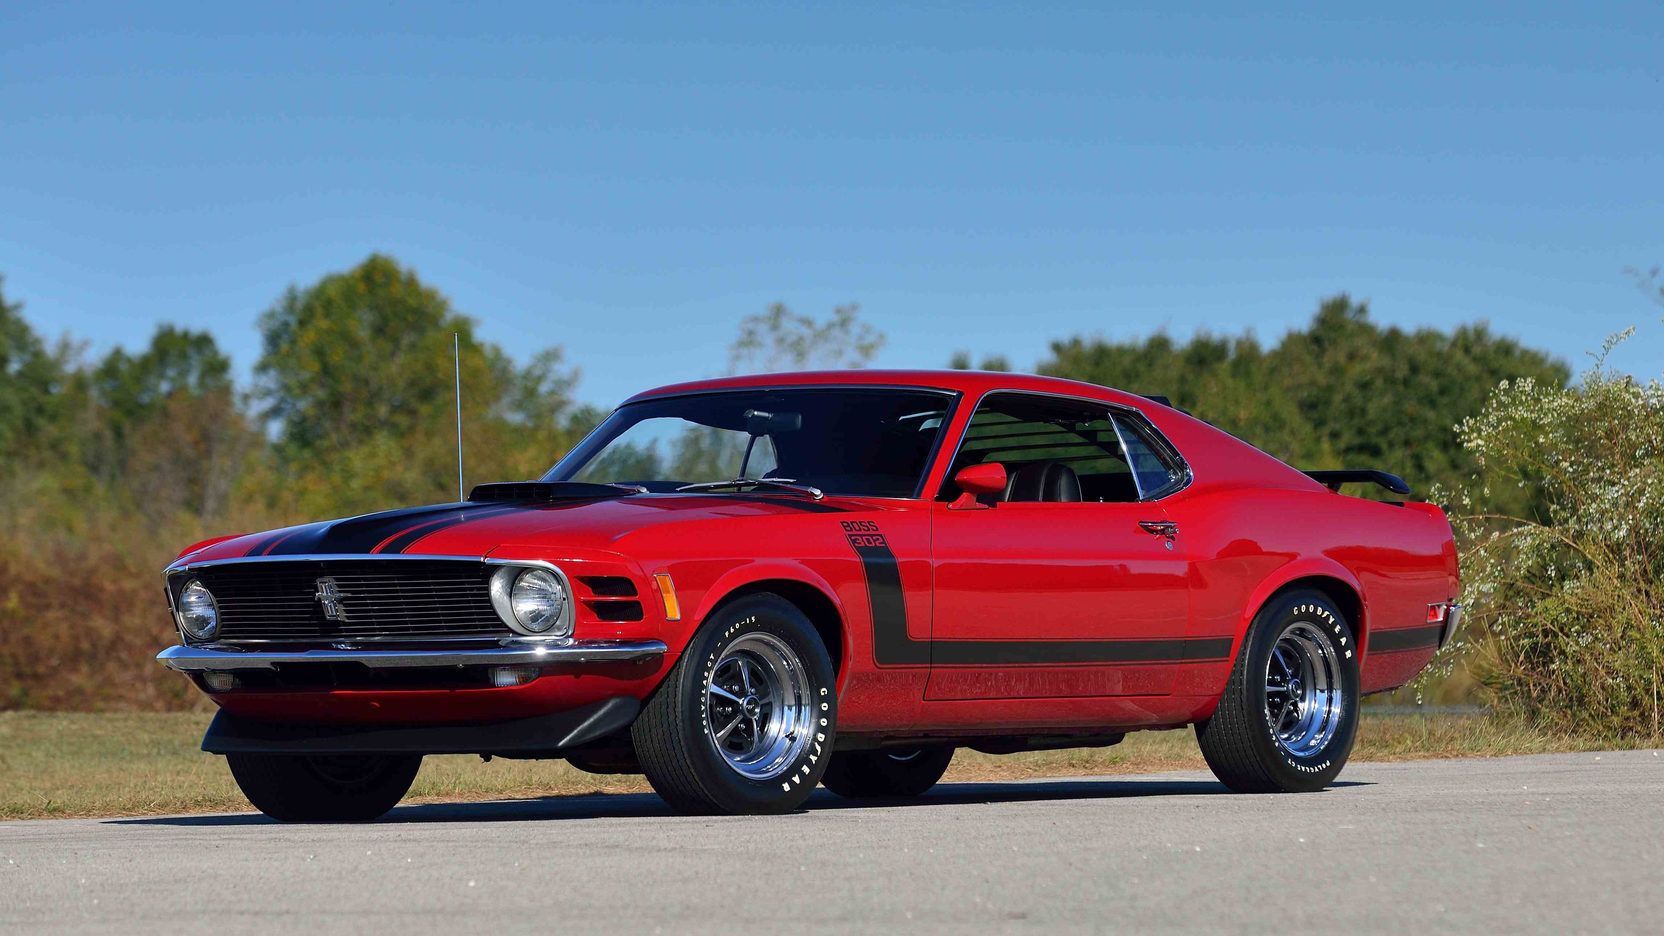 10 Reasons Why The Boss 302 Is The Best Non-Shelby Mustang